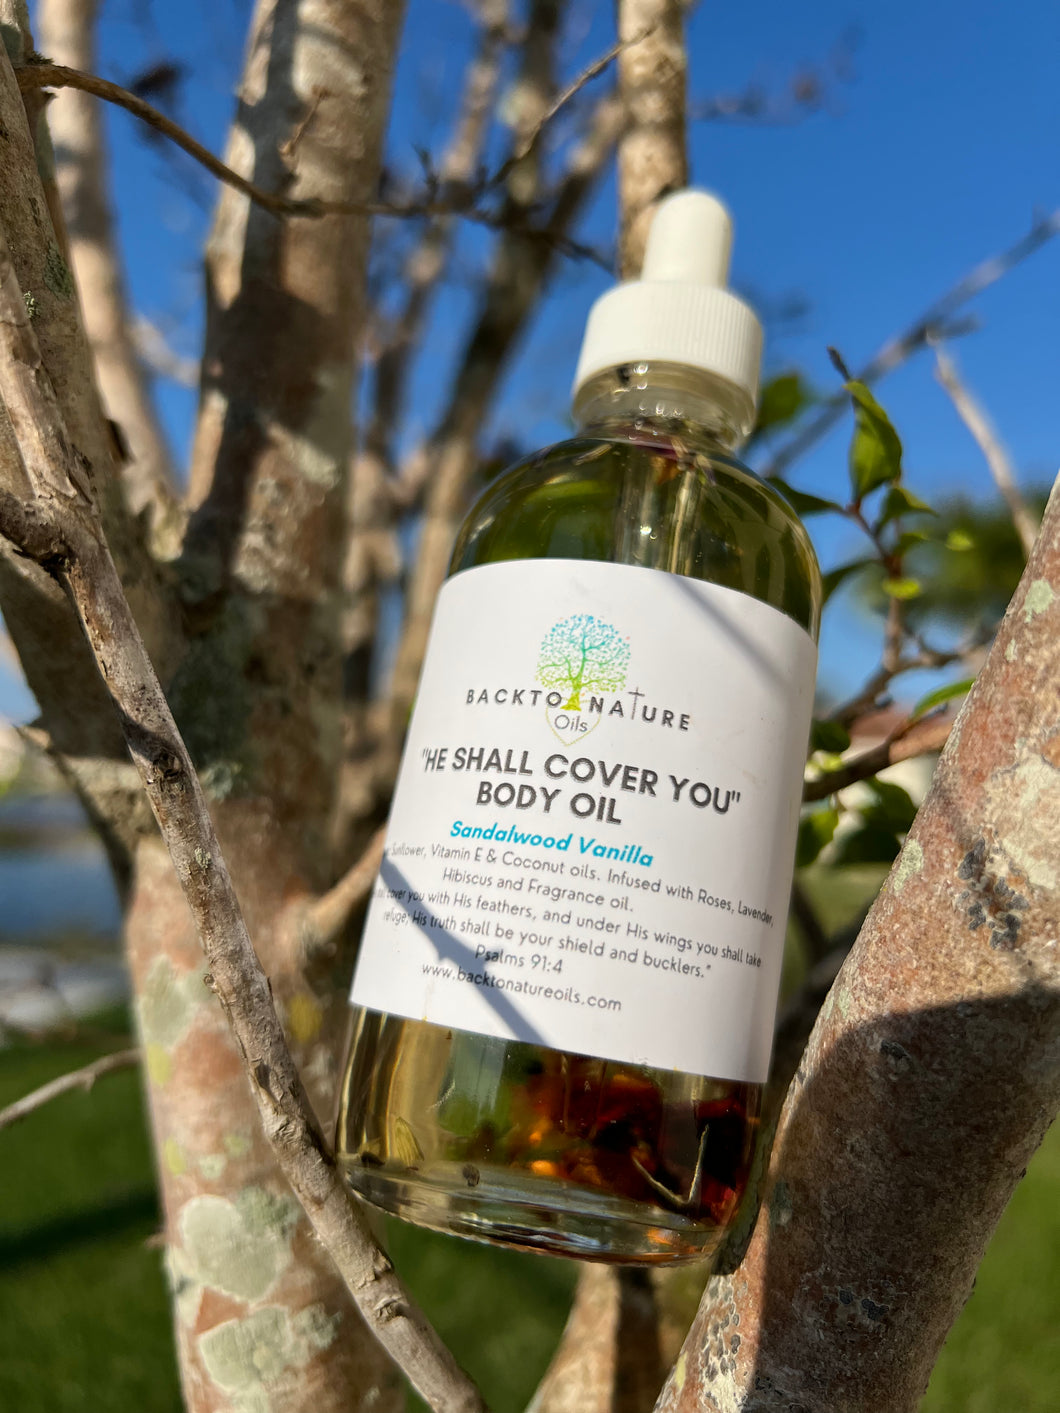 “He Shall Cover You”  Body Oil 𝑠𝑎𝑛𝑑𝑎𝑙𝑤𝑜𝑜𝑑 𝑣𝑎𝑛𝑖𝑙𝑙𝑎